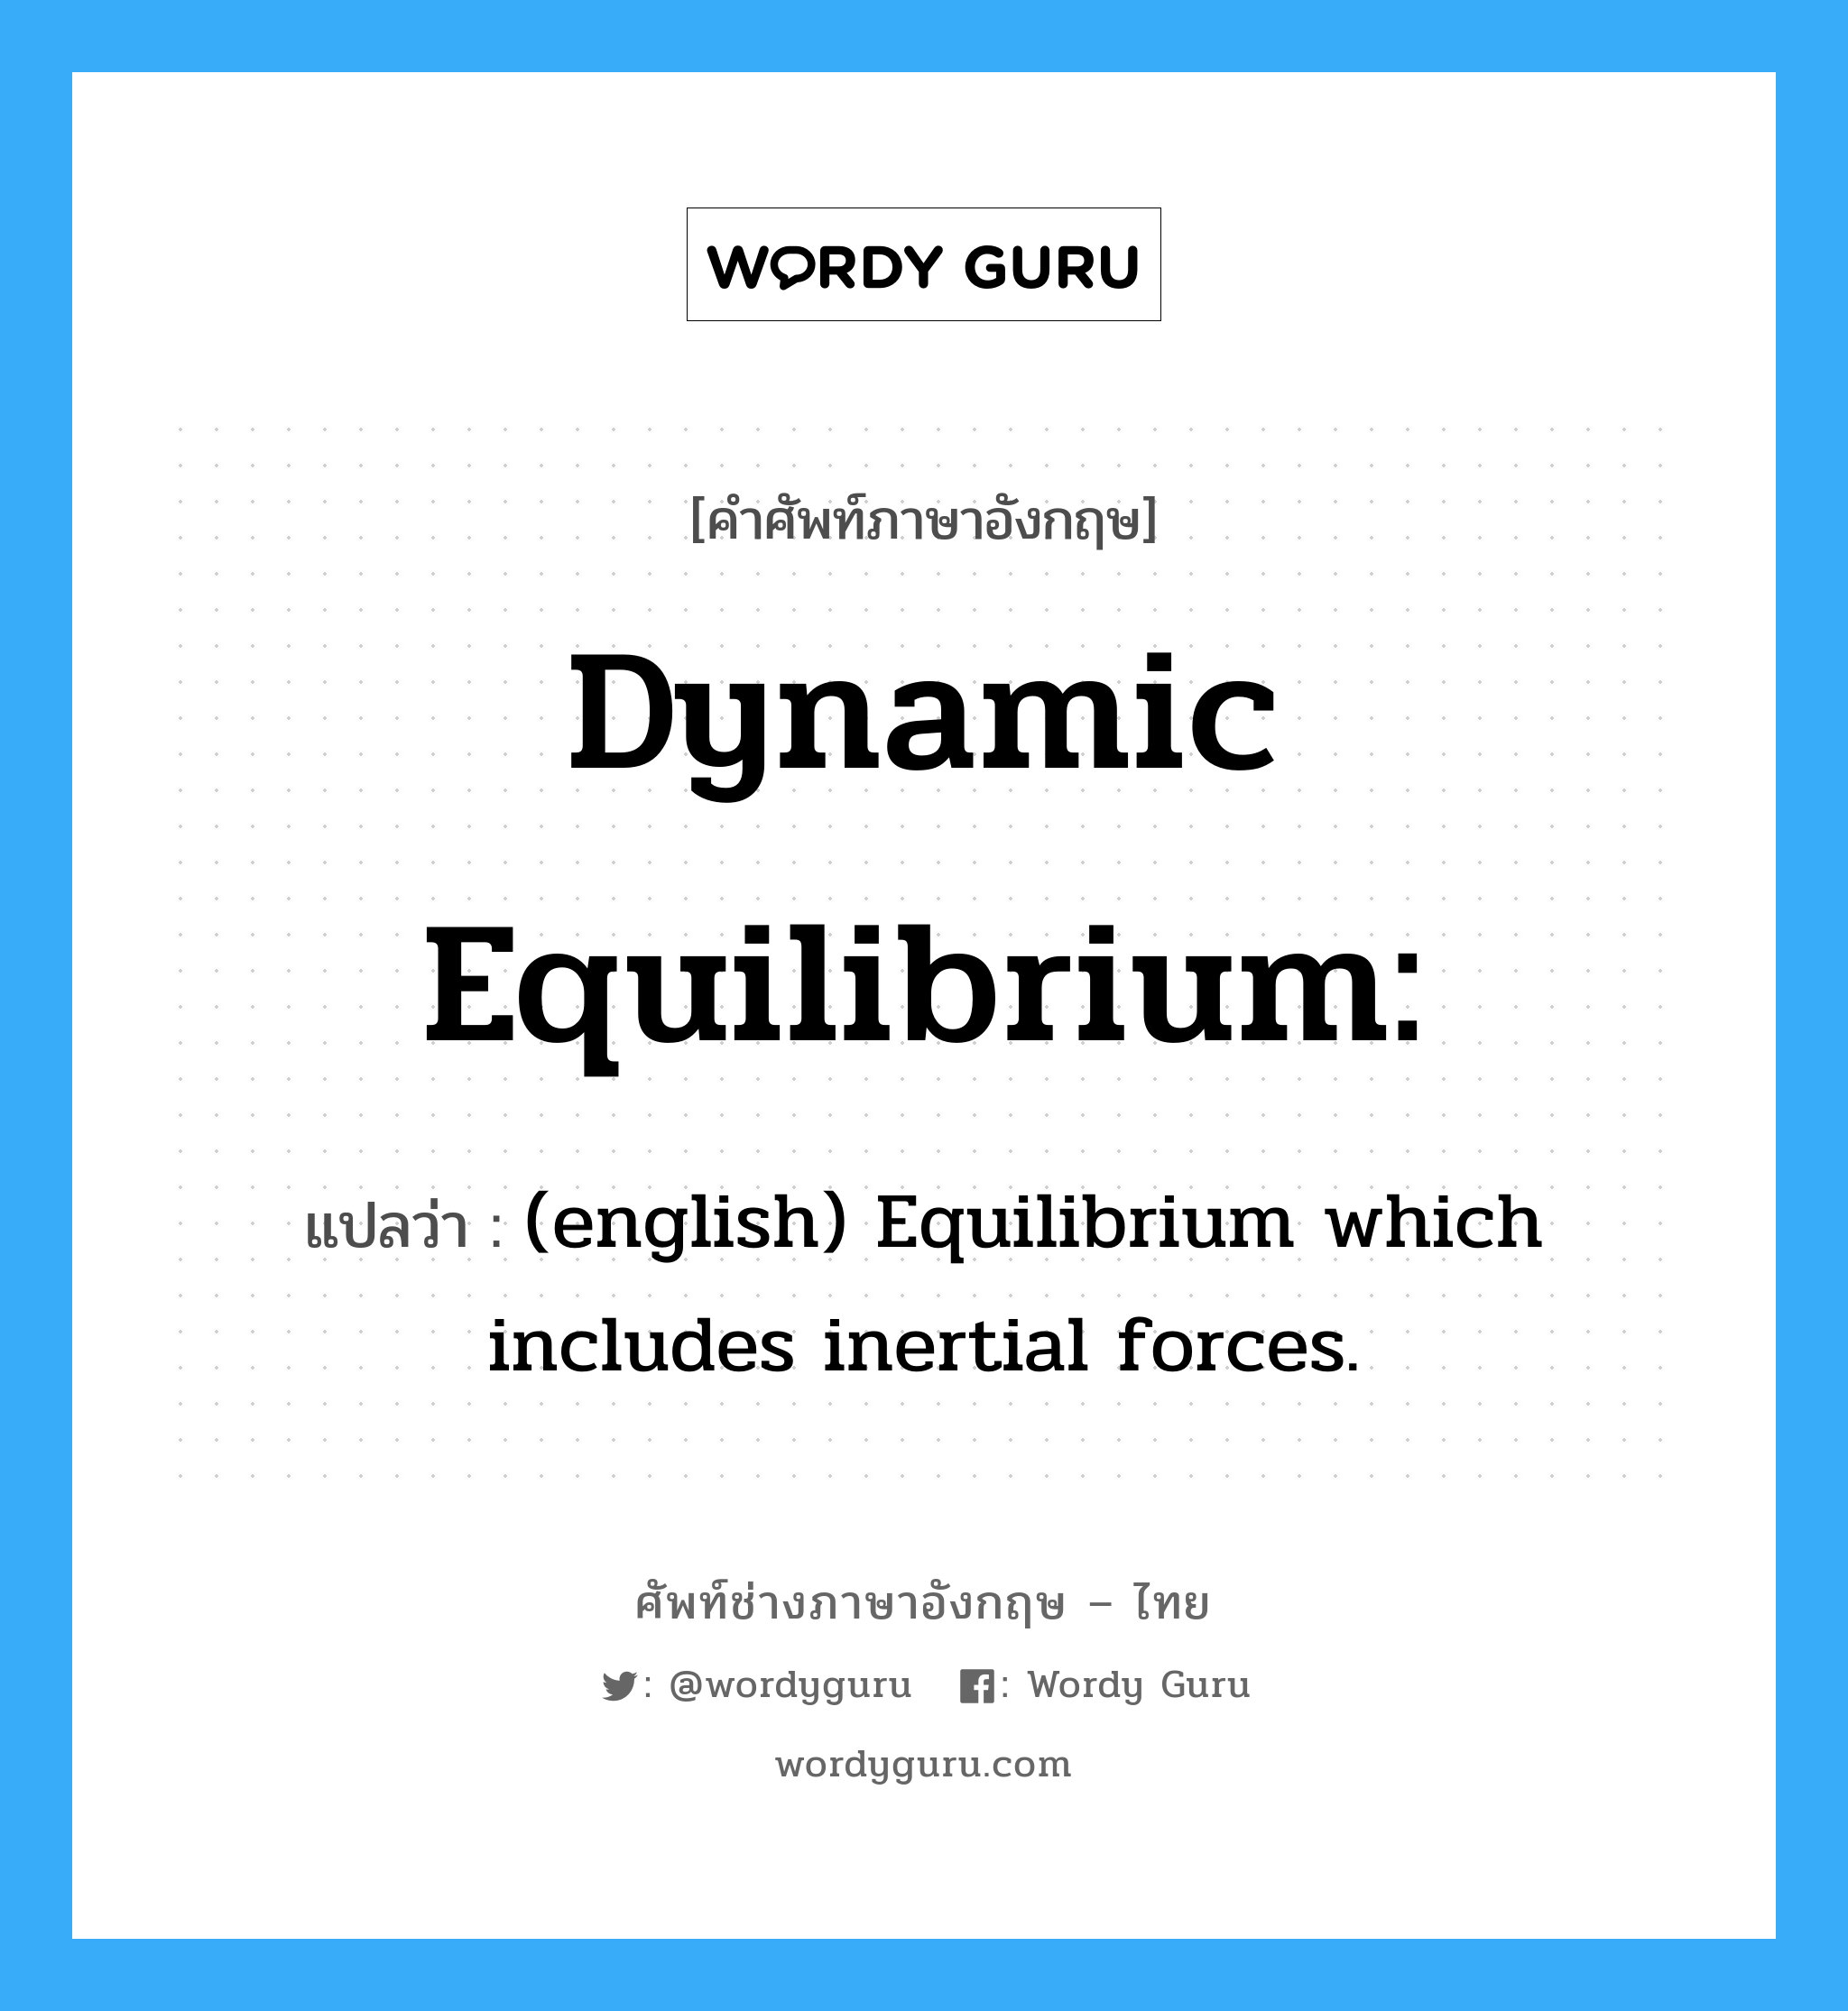 (english) Equilibrium which includes inertial forces. ภาษาอังกฤษ?, คำศัพท์ช่างภาษาอังกฤษ - ไทย (english) Equilibrium which includes inertial forces. คำศัพท์ภาษาอังกฤษ (english) Equilibrium which includes inertial forces. แปลว่า Dynamic equilibrium: